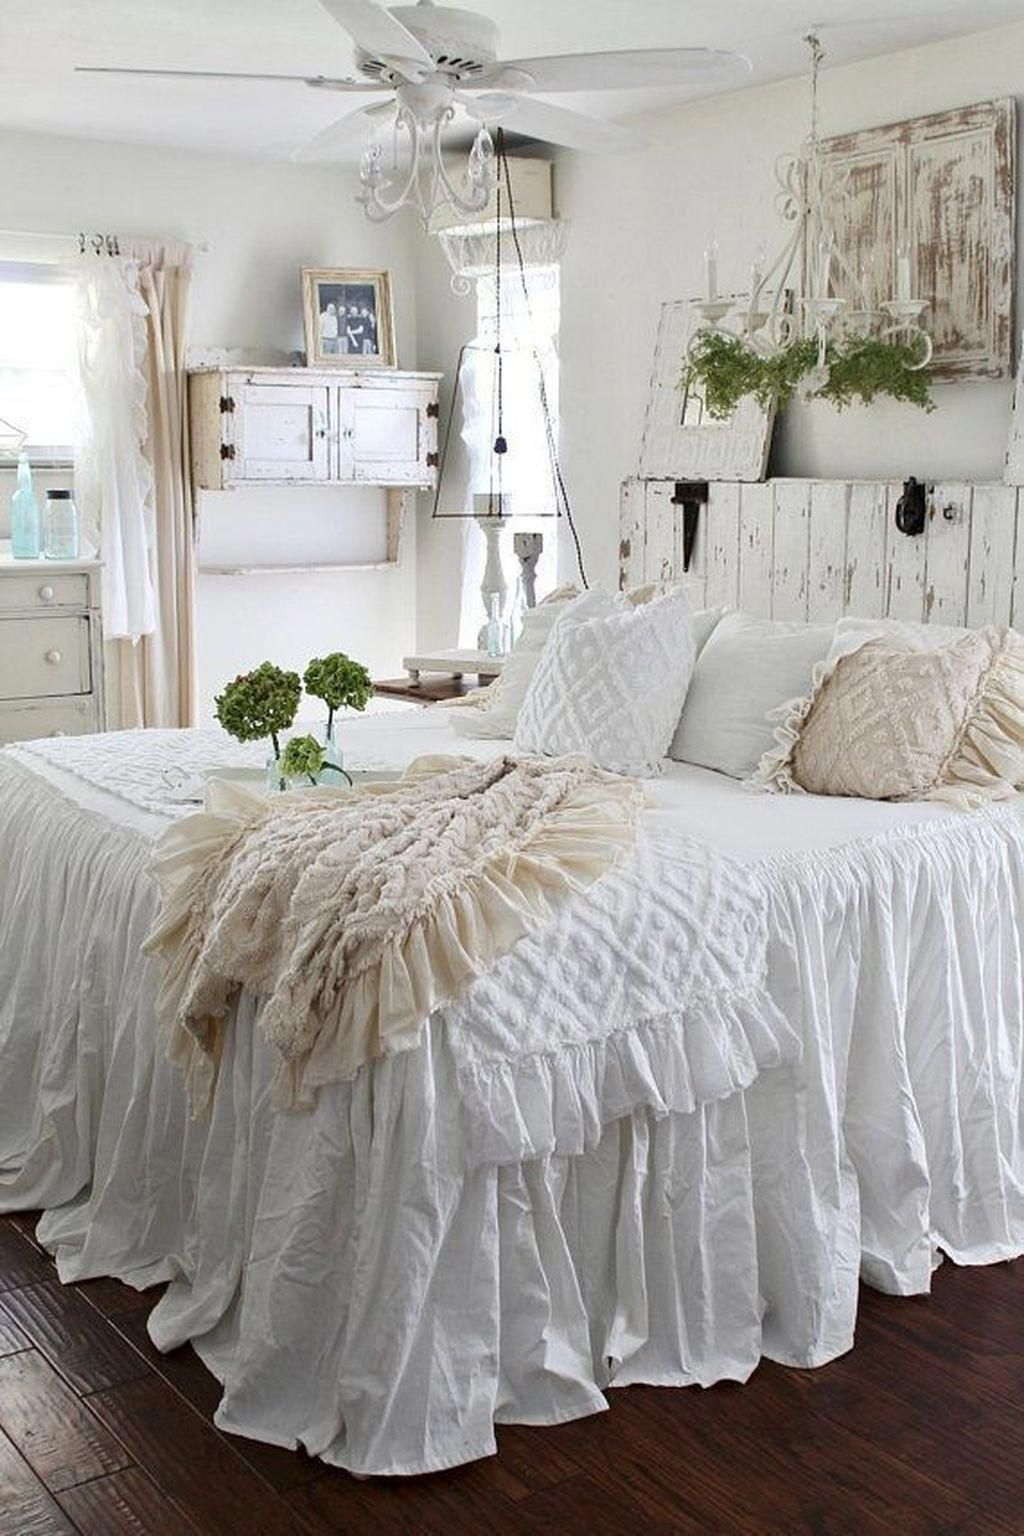 Shabby Chic Bedroom Accessories
 23 Most Beautiful Shabby Chic Bedroom Ideas